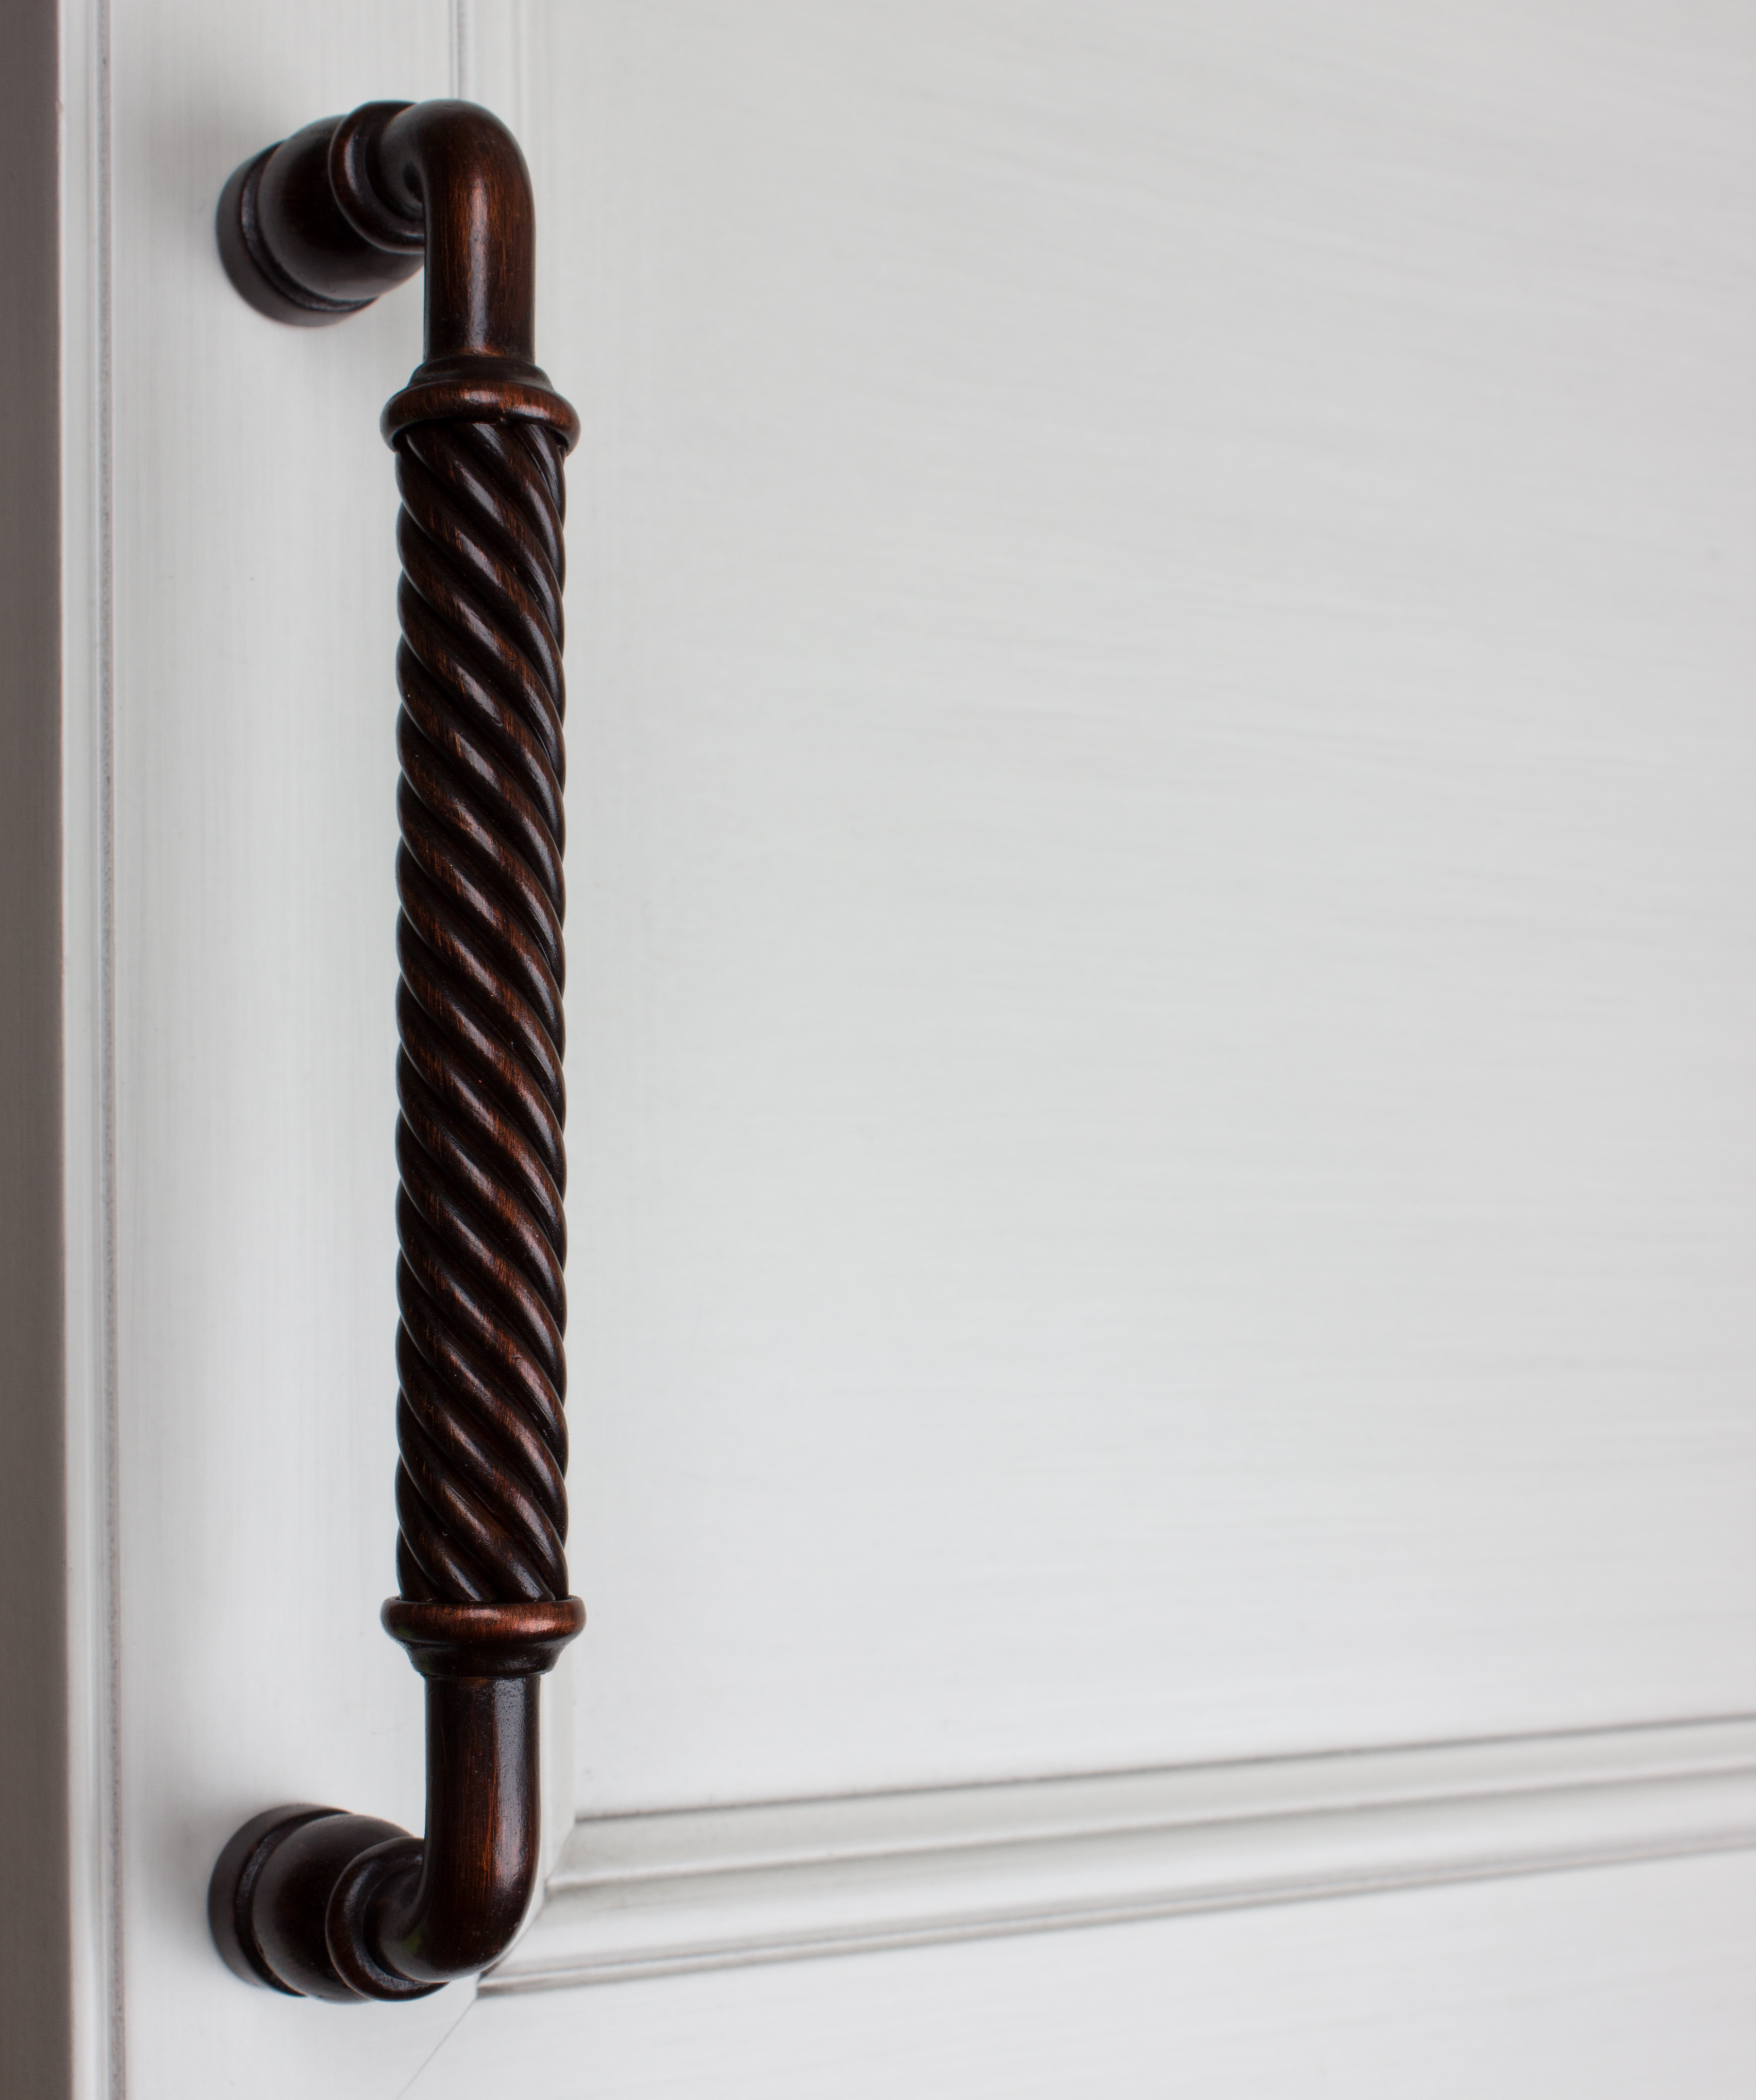 GlideRite 6-1/4 in. Center Rustic Bronze Twisted Cabinet Drawer Pull, Oil Rubbed Bronze - image 4 of 5